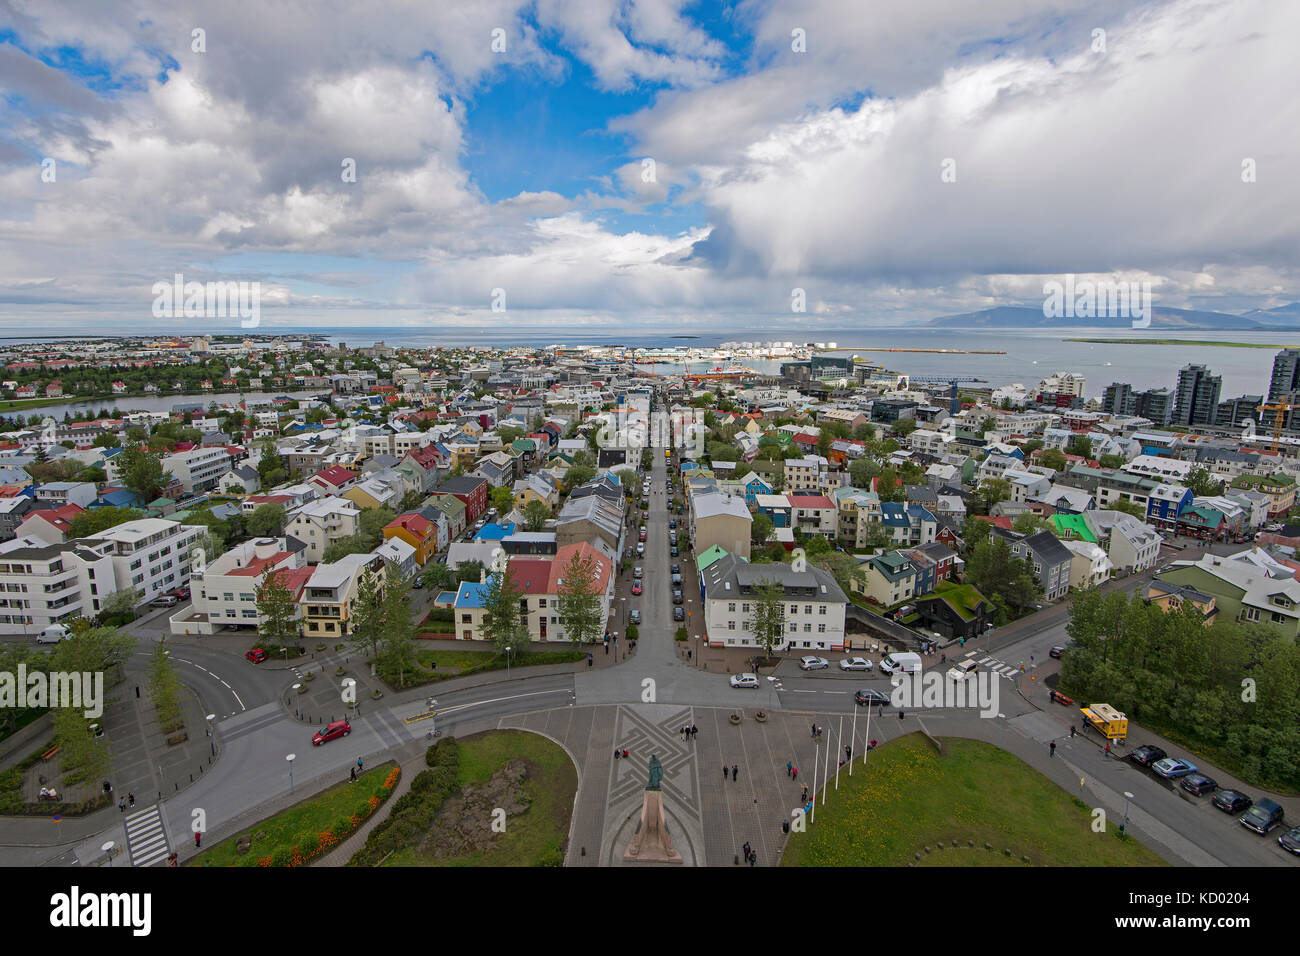 An elevated view of Reykjavic from Hallgrímskirkjac church of Hallgrímur. At 74.5 metres high (244 ft), it is the largest church in Iceland and among the tallest structures in Iceland. Stock Photo